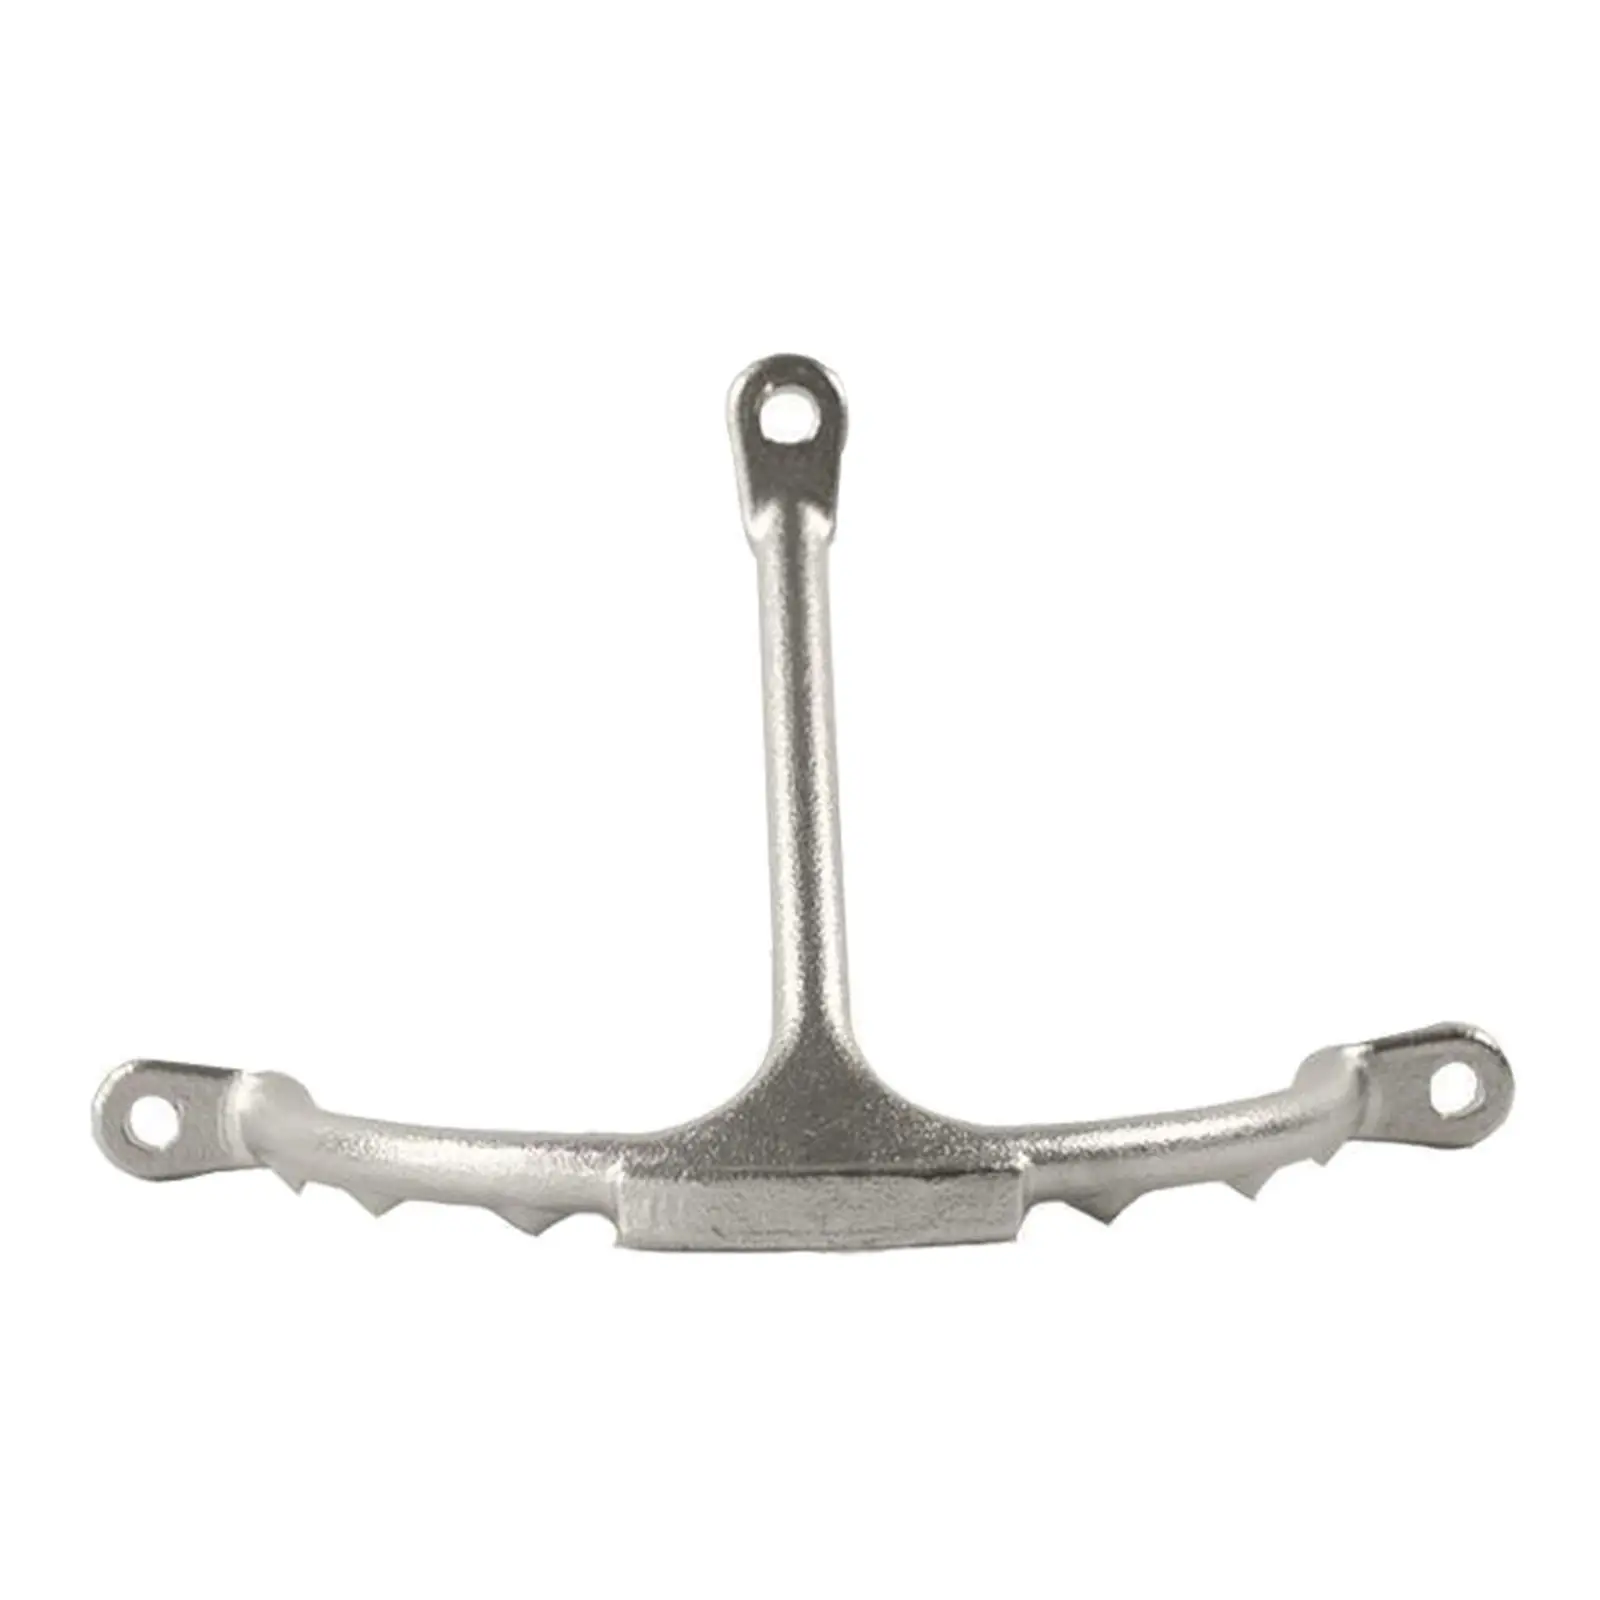 

1pcs Marine Boat Support Bracket Easy to Install Marine Accessory 100x50mm/3.94x1.97inch